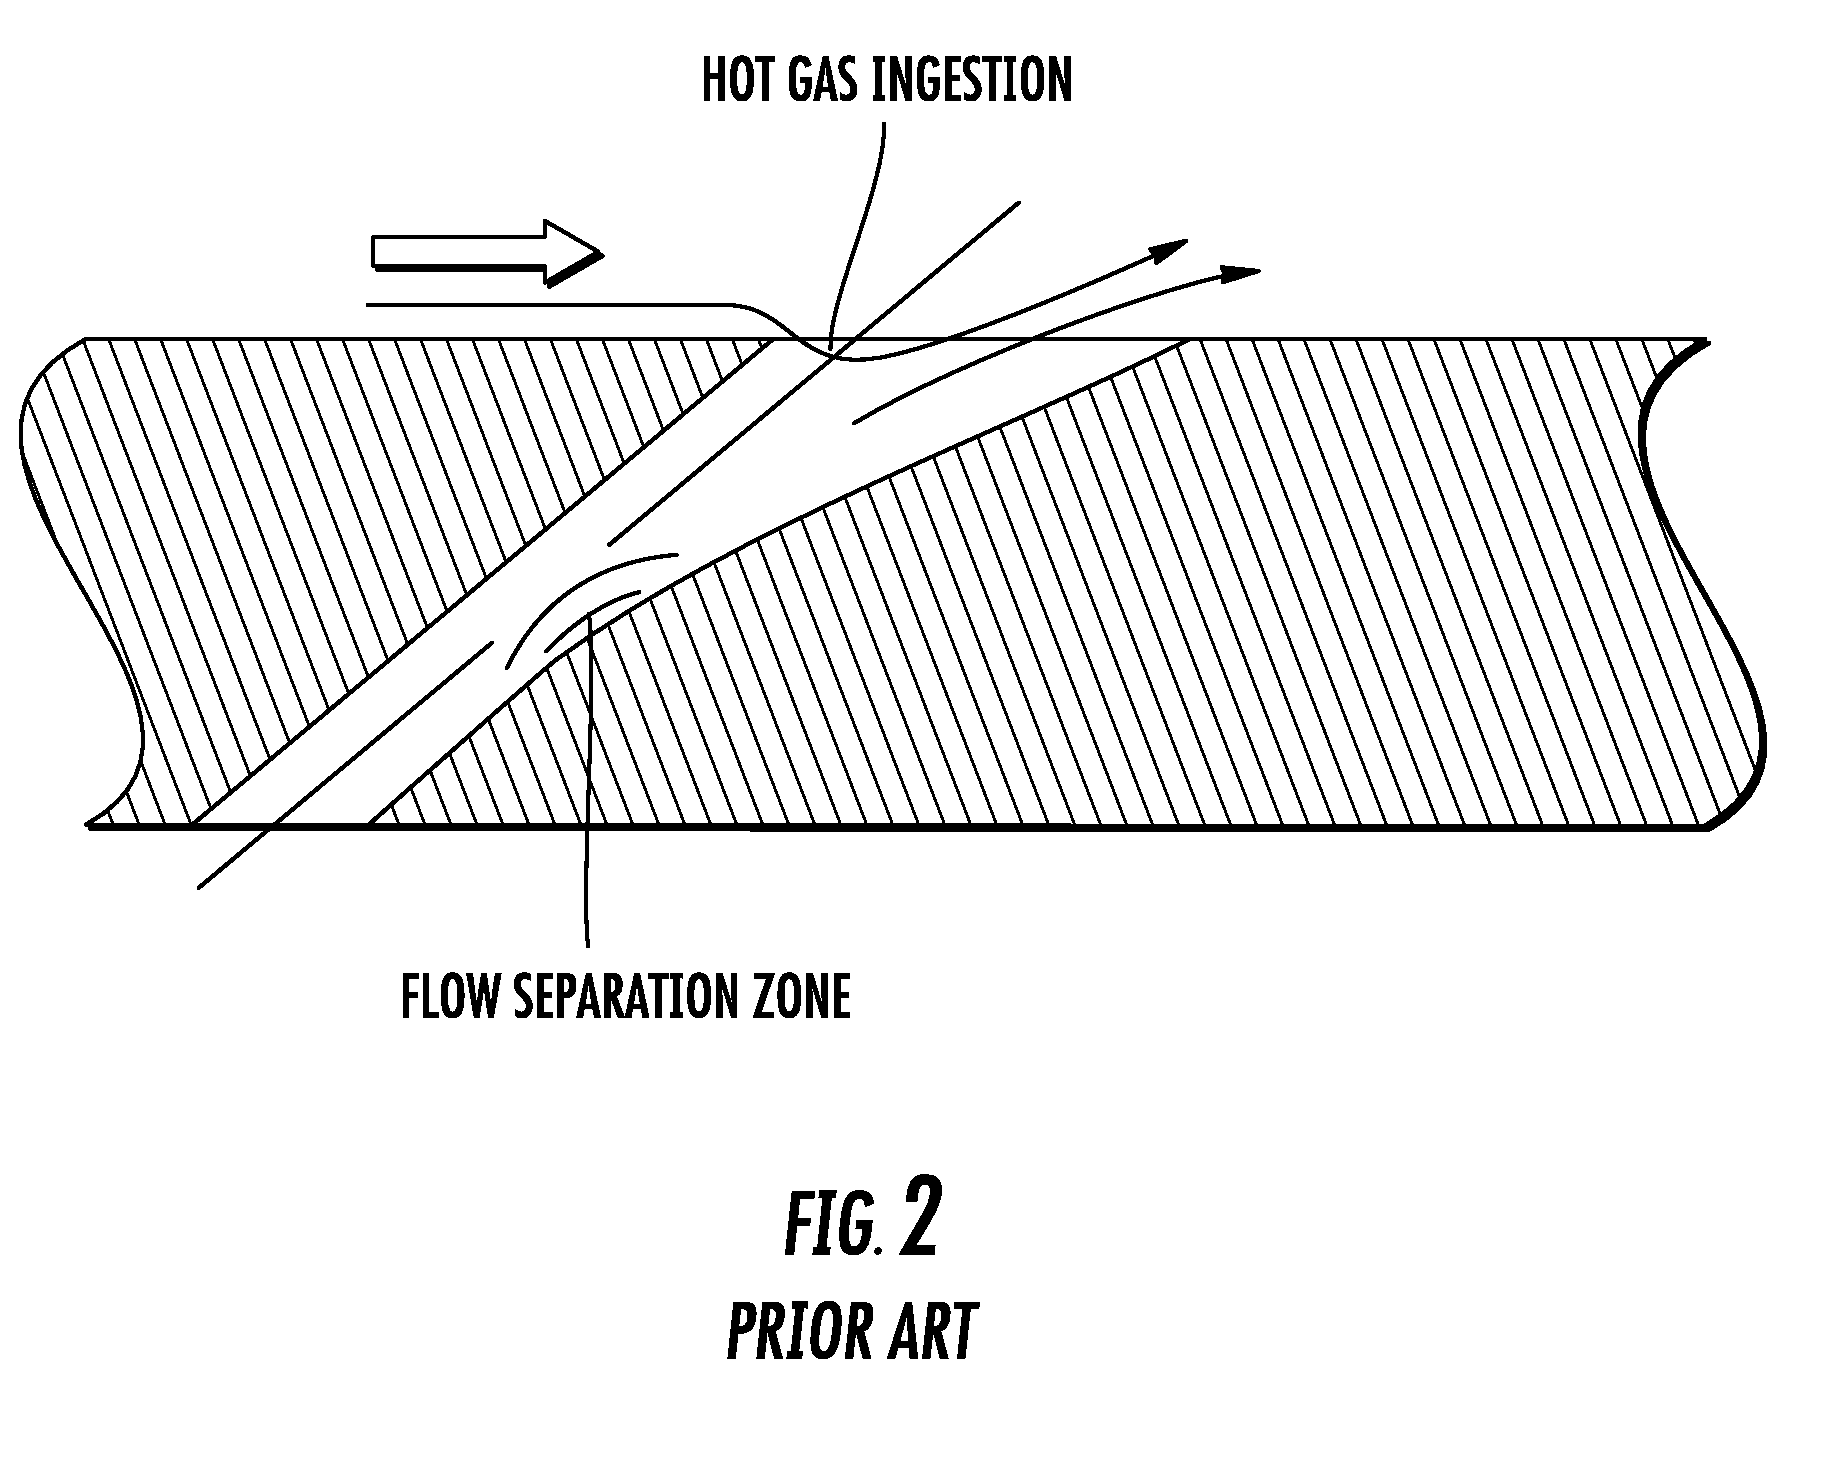 Turbine Airfoil Cooling System with Diffusion Film Cooling Hole Having Flow Restriction Rib